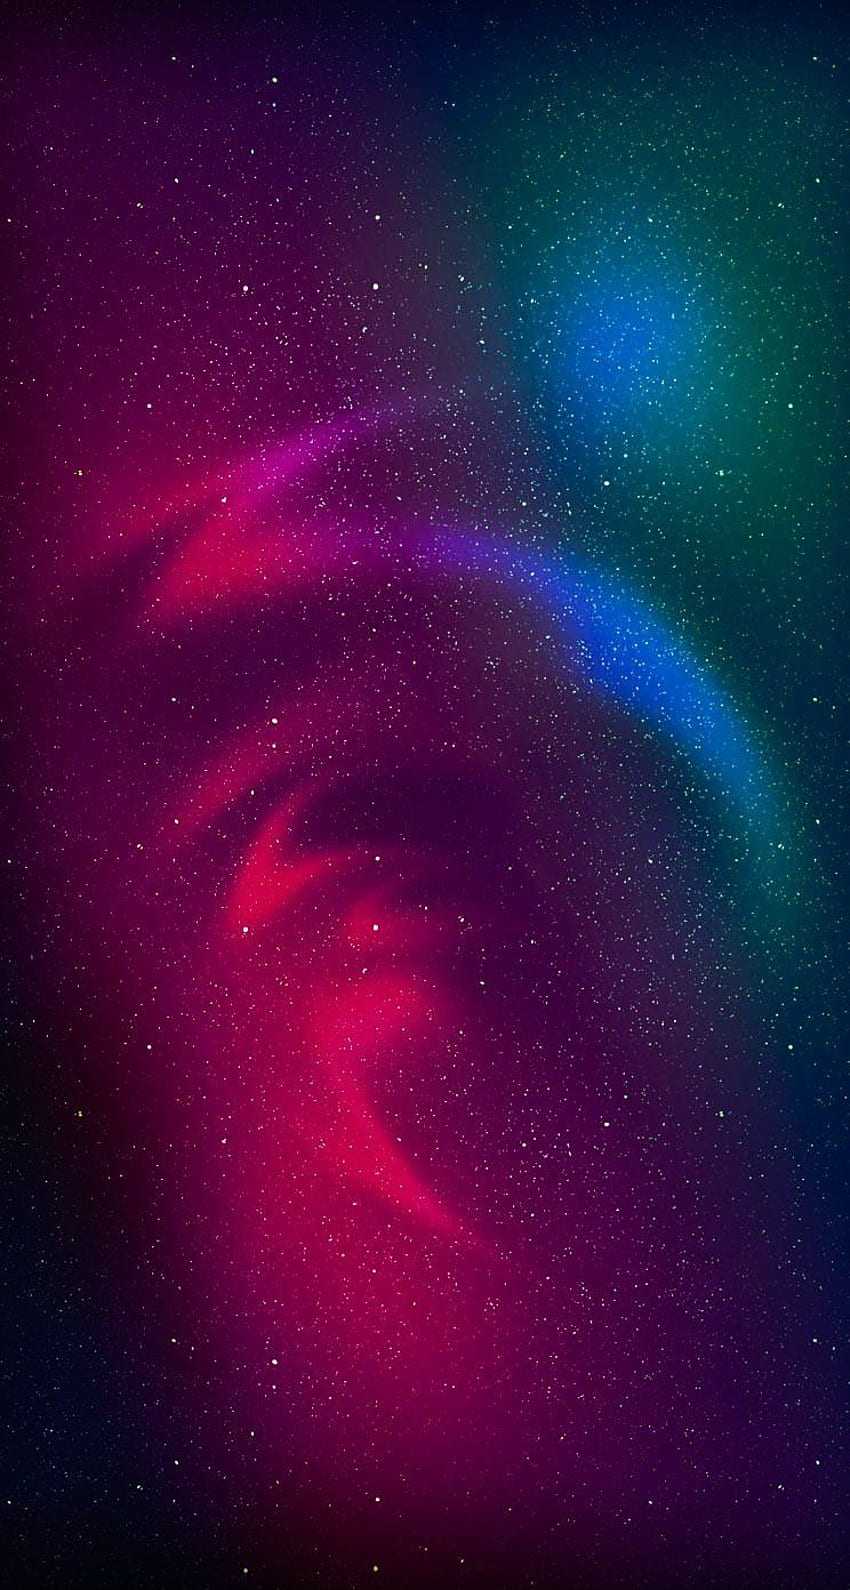 hd iphone 5 wallpapers